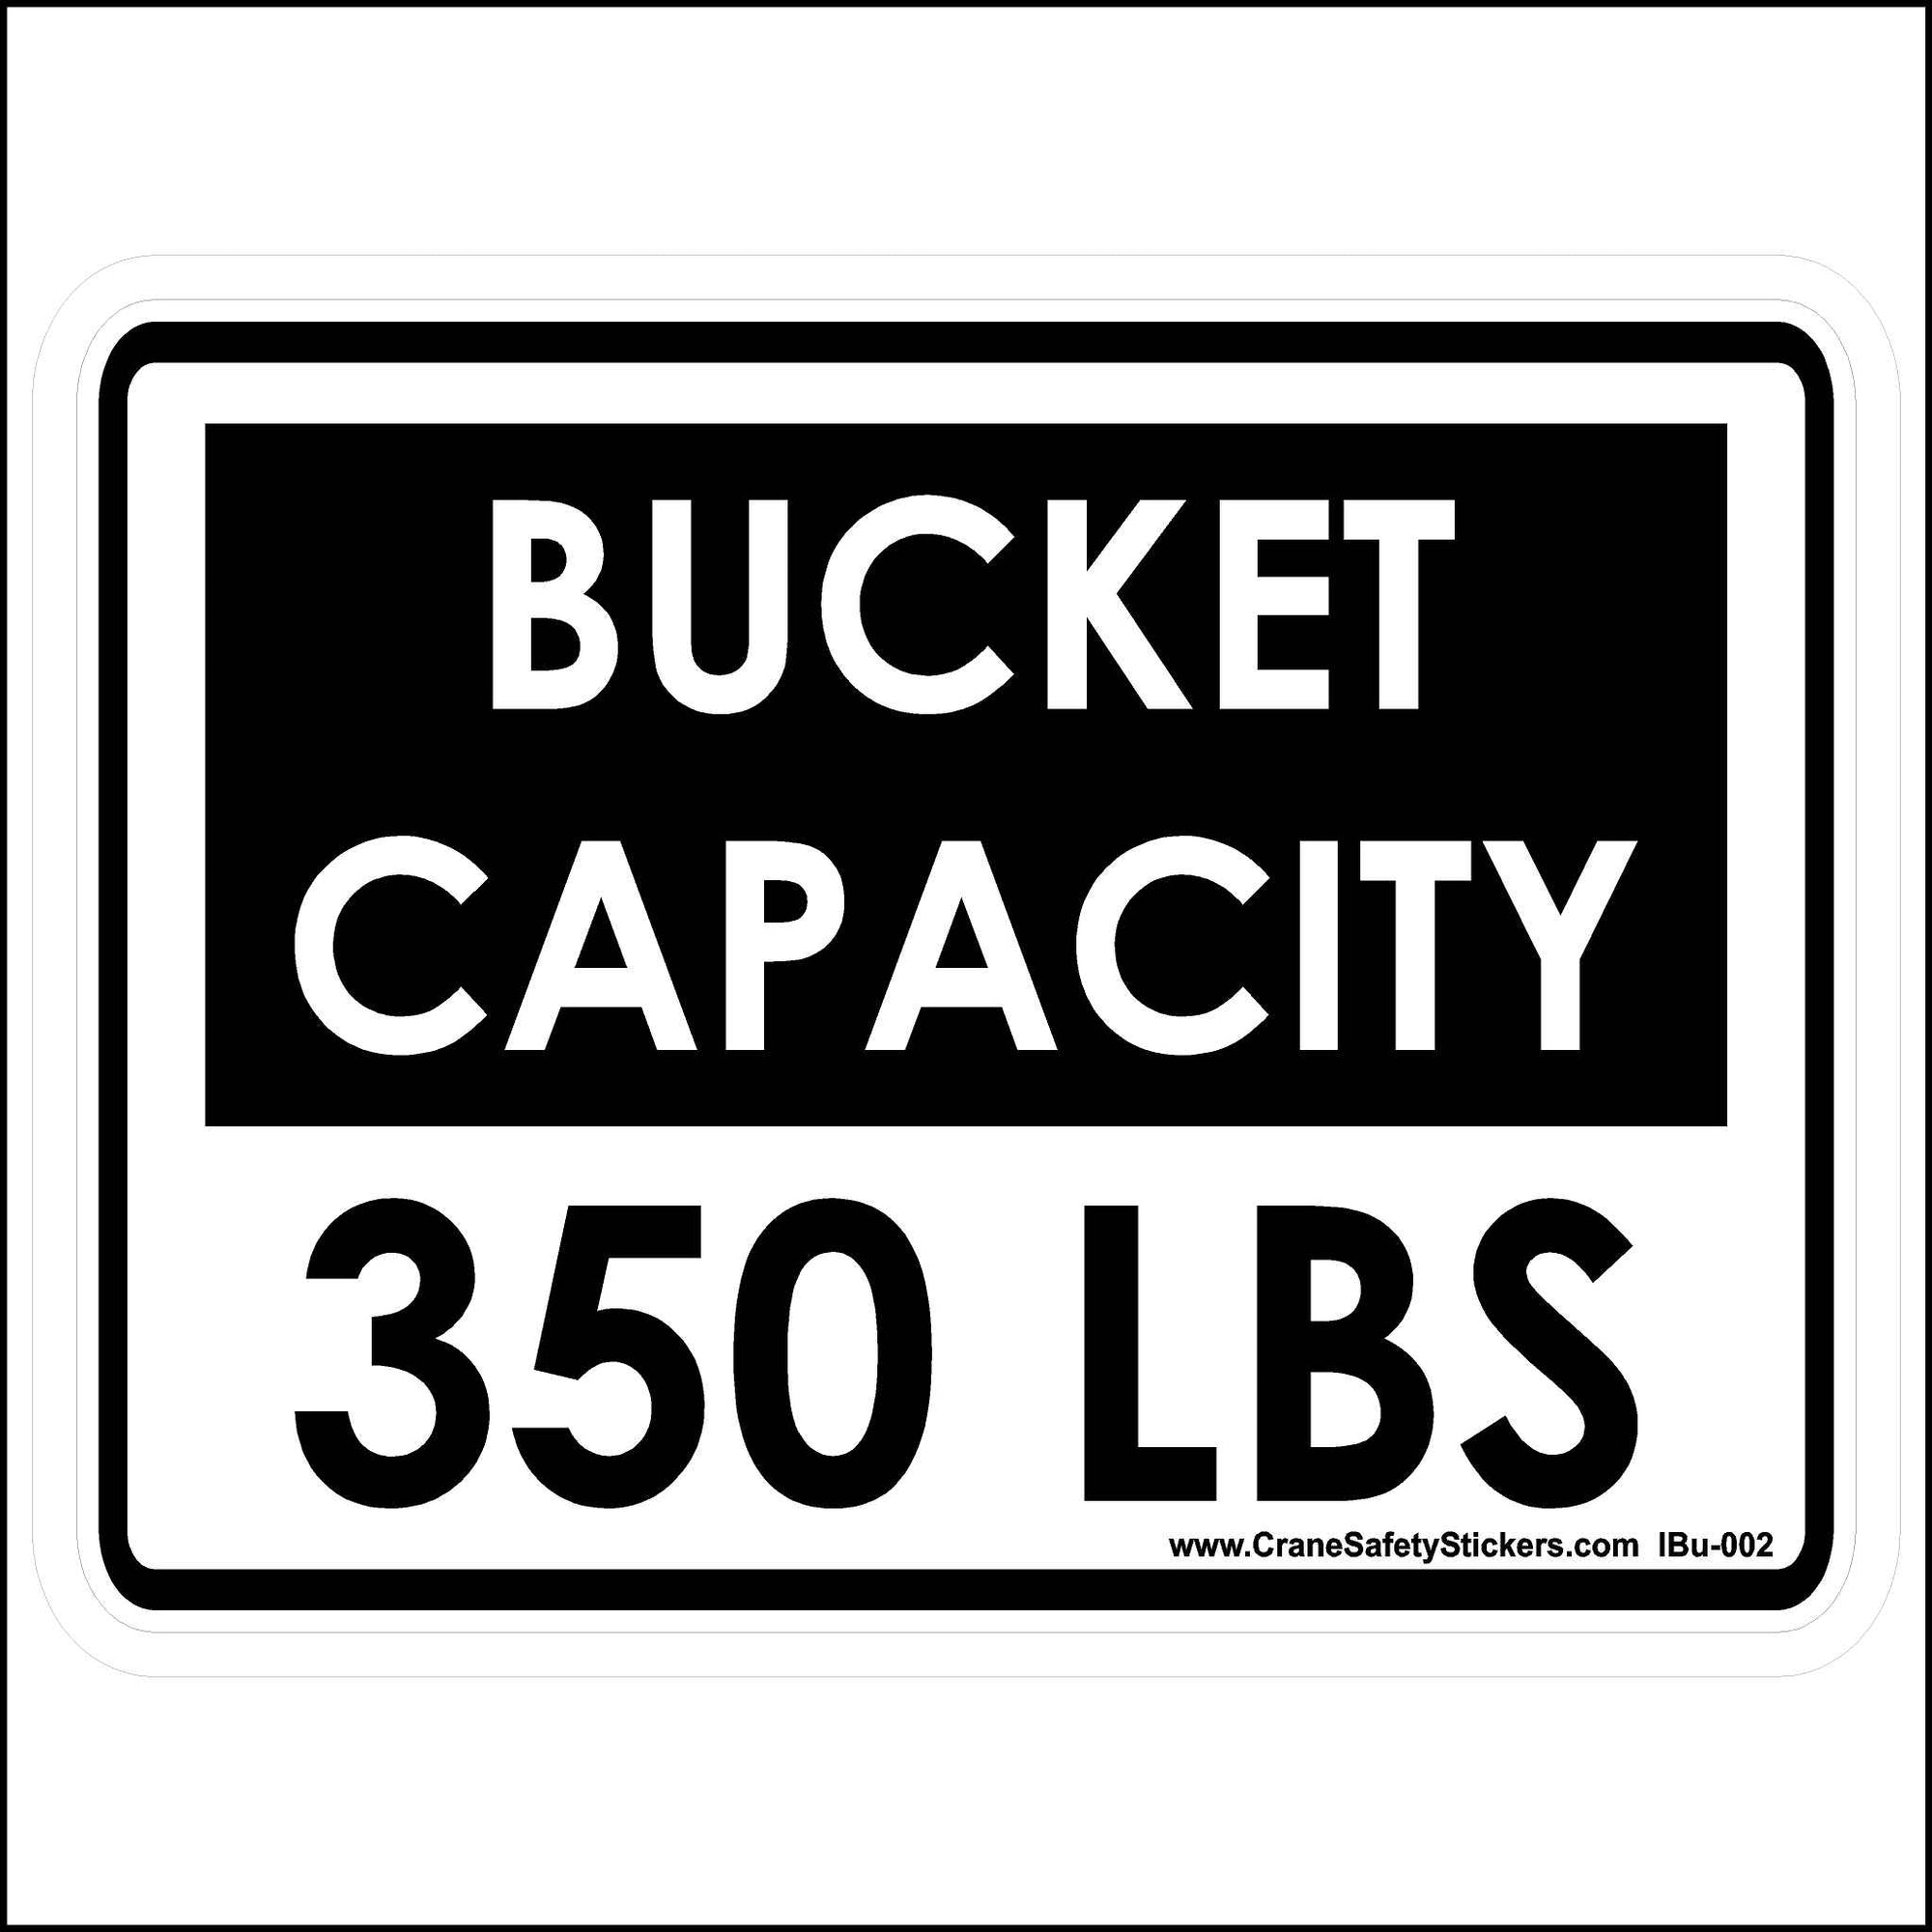 This Bucket Capacity 350 Lbs Sticker For Bucket Trucks Is Printed With. Bucket Capacity 350 LBS.